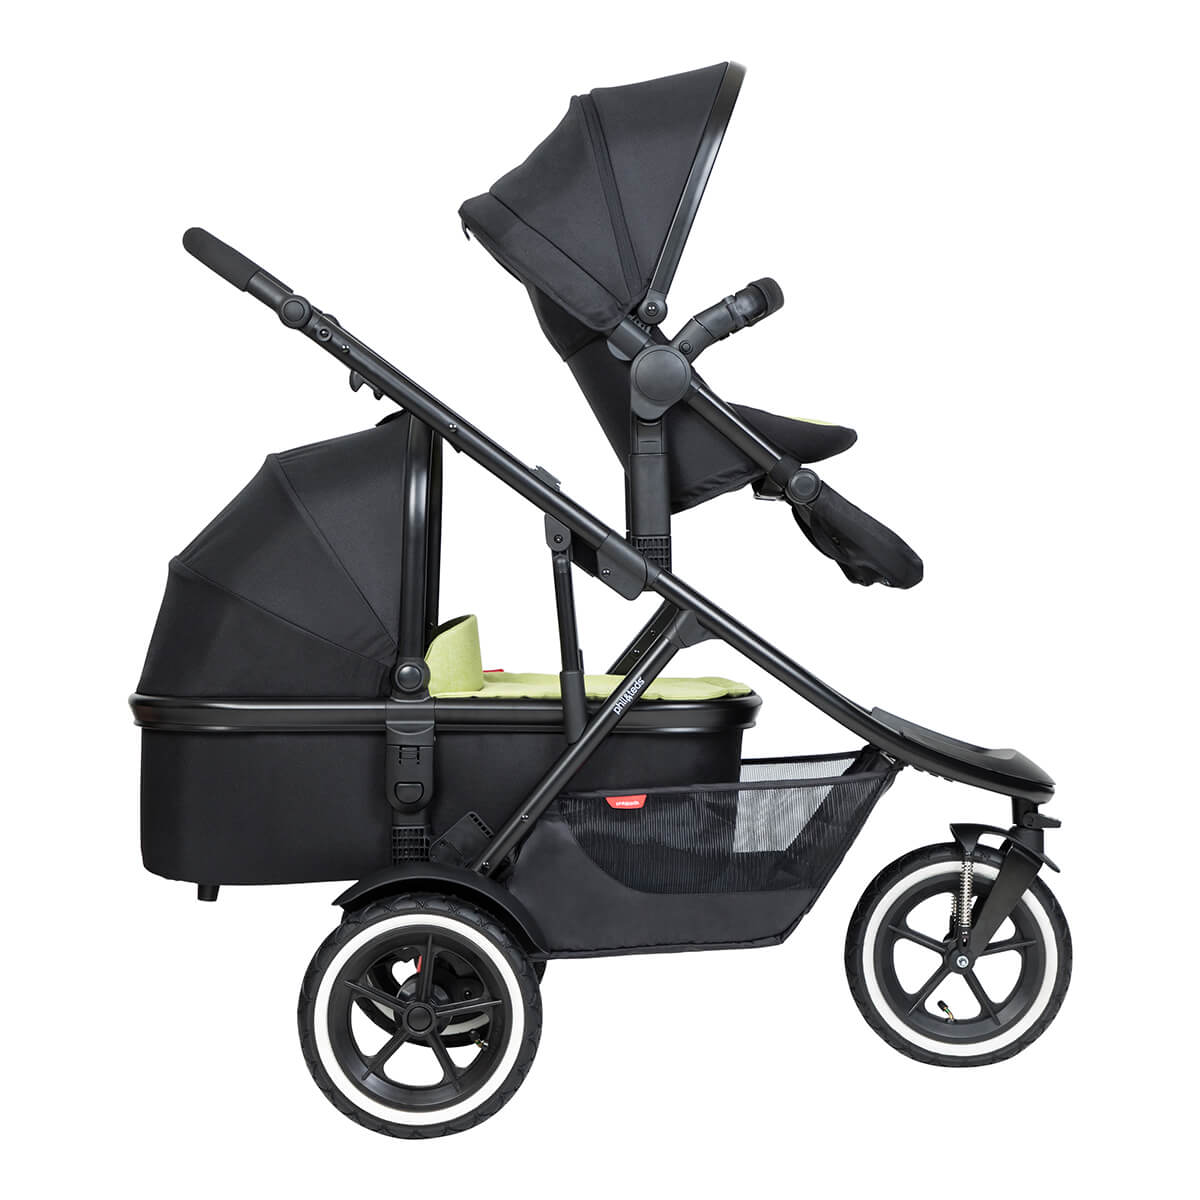 https://cdn.accentuate.io/8582363054419/19272668282968/philteds-sport-buggy-with-double-kit-extended-clip-and-snug-carrycot-side-view-v1700698189629.jpg?1200x1200